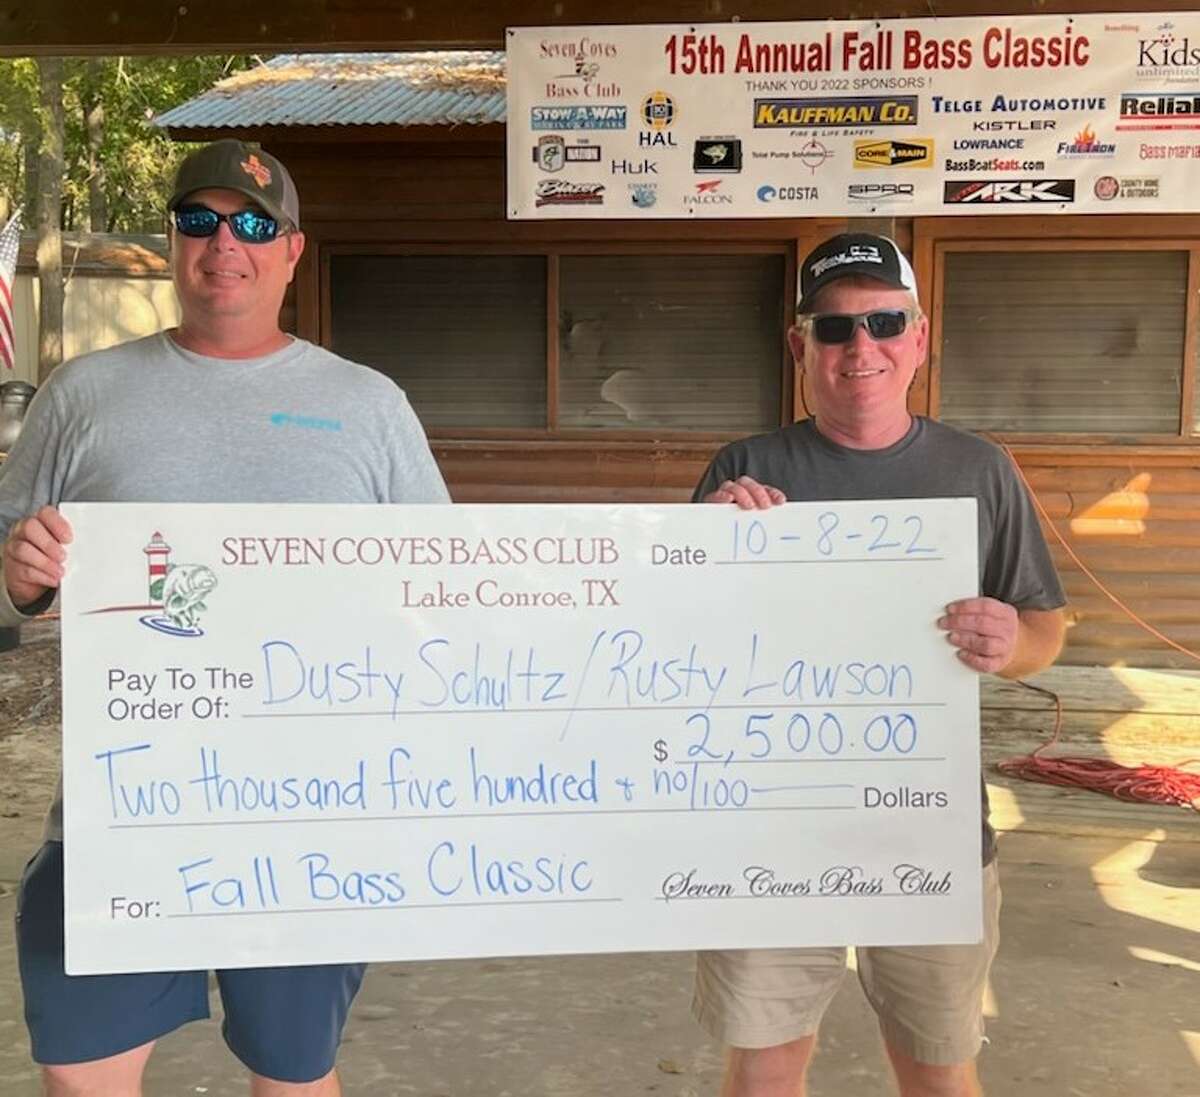 Dusty Schultz and Rusty Lawson came in first place in the Seven Coves Bass Club 15th Annual Fall Bass Classic with a stringer weight of 22.18 pounds.